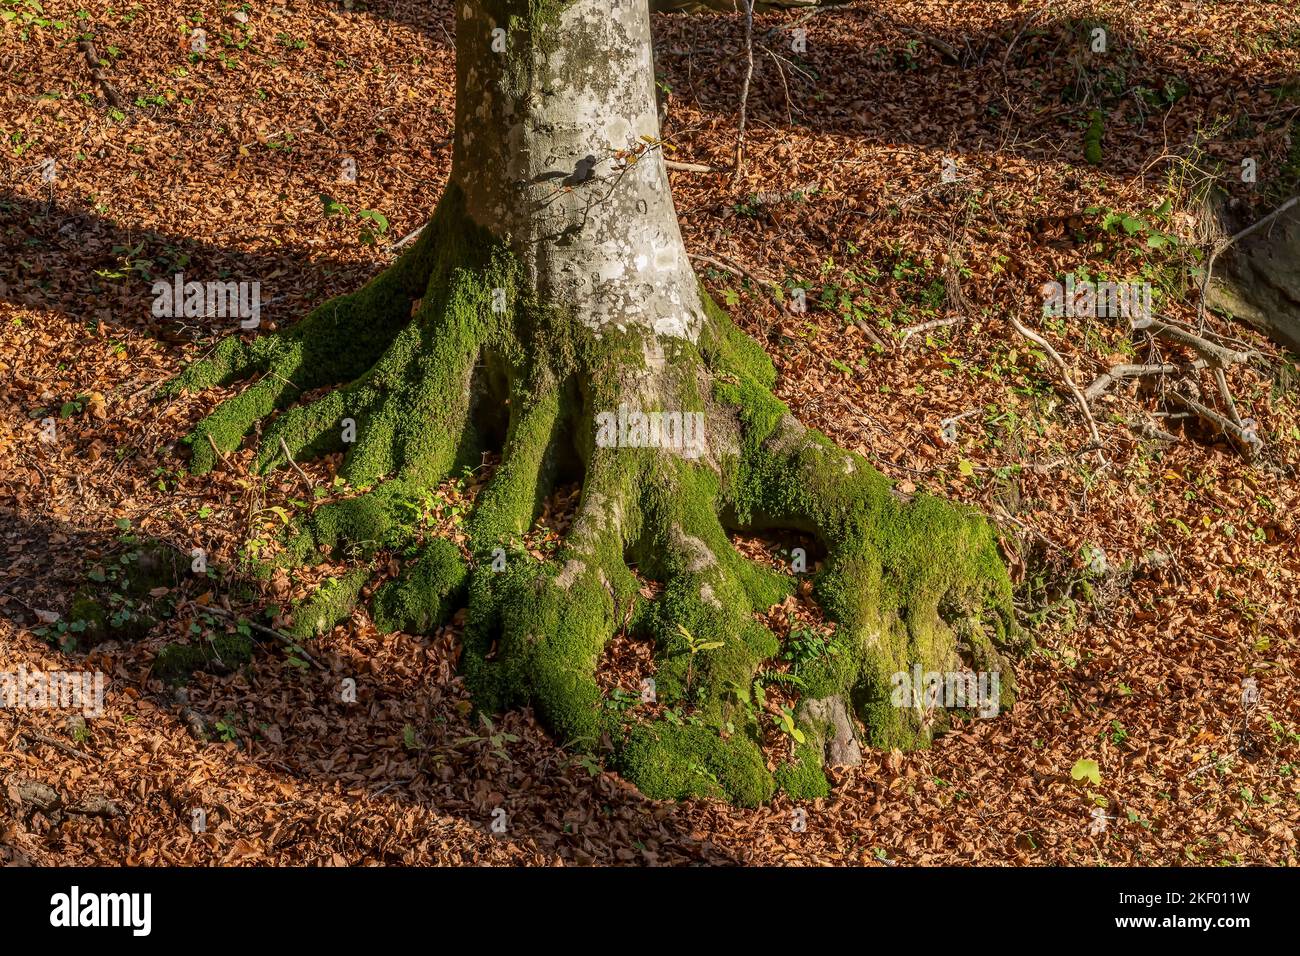 The base and roots of a tree are covered in green moss, surrounded by a carpet of dry leaves, Badia Prataglia, Italy Stock Photo